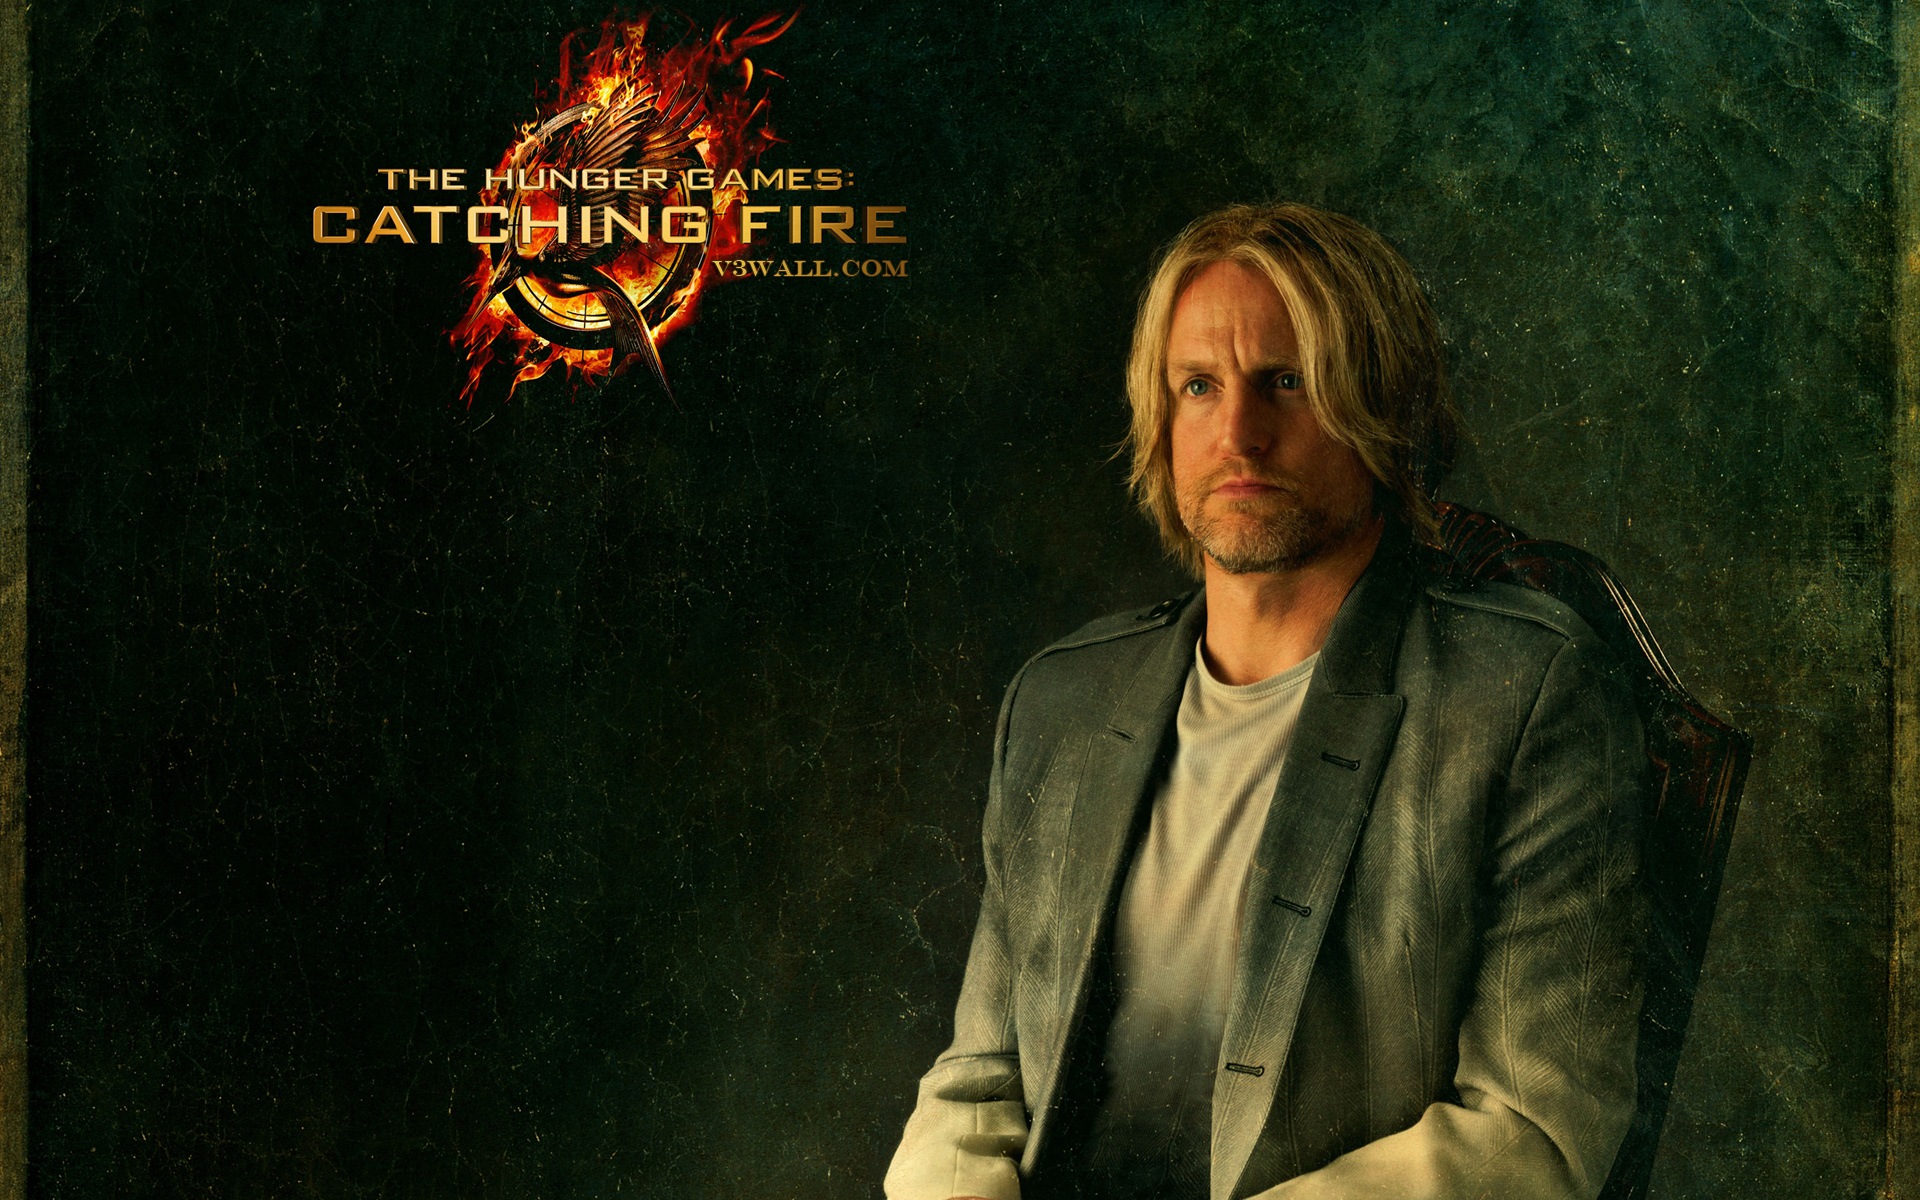 The Hunger Games: Catching Fire wallpapers HD #12 - 1920x1200